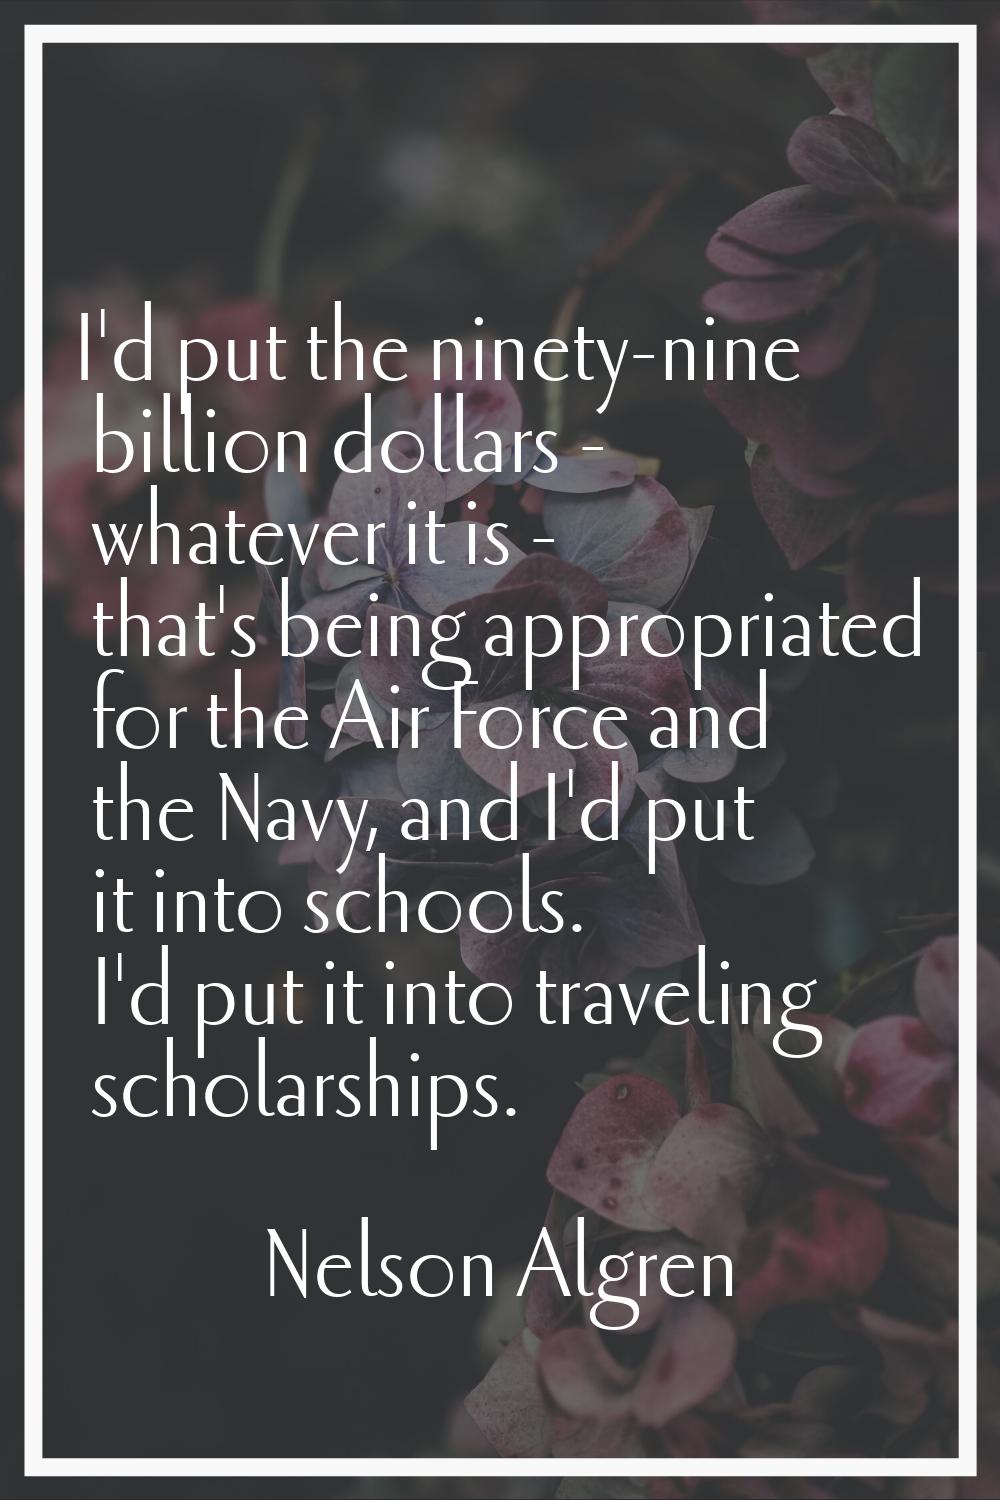 I'd put the ninety-nine billion dollars - whatever it is - that's being appropriated for the Air Fo